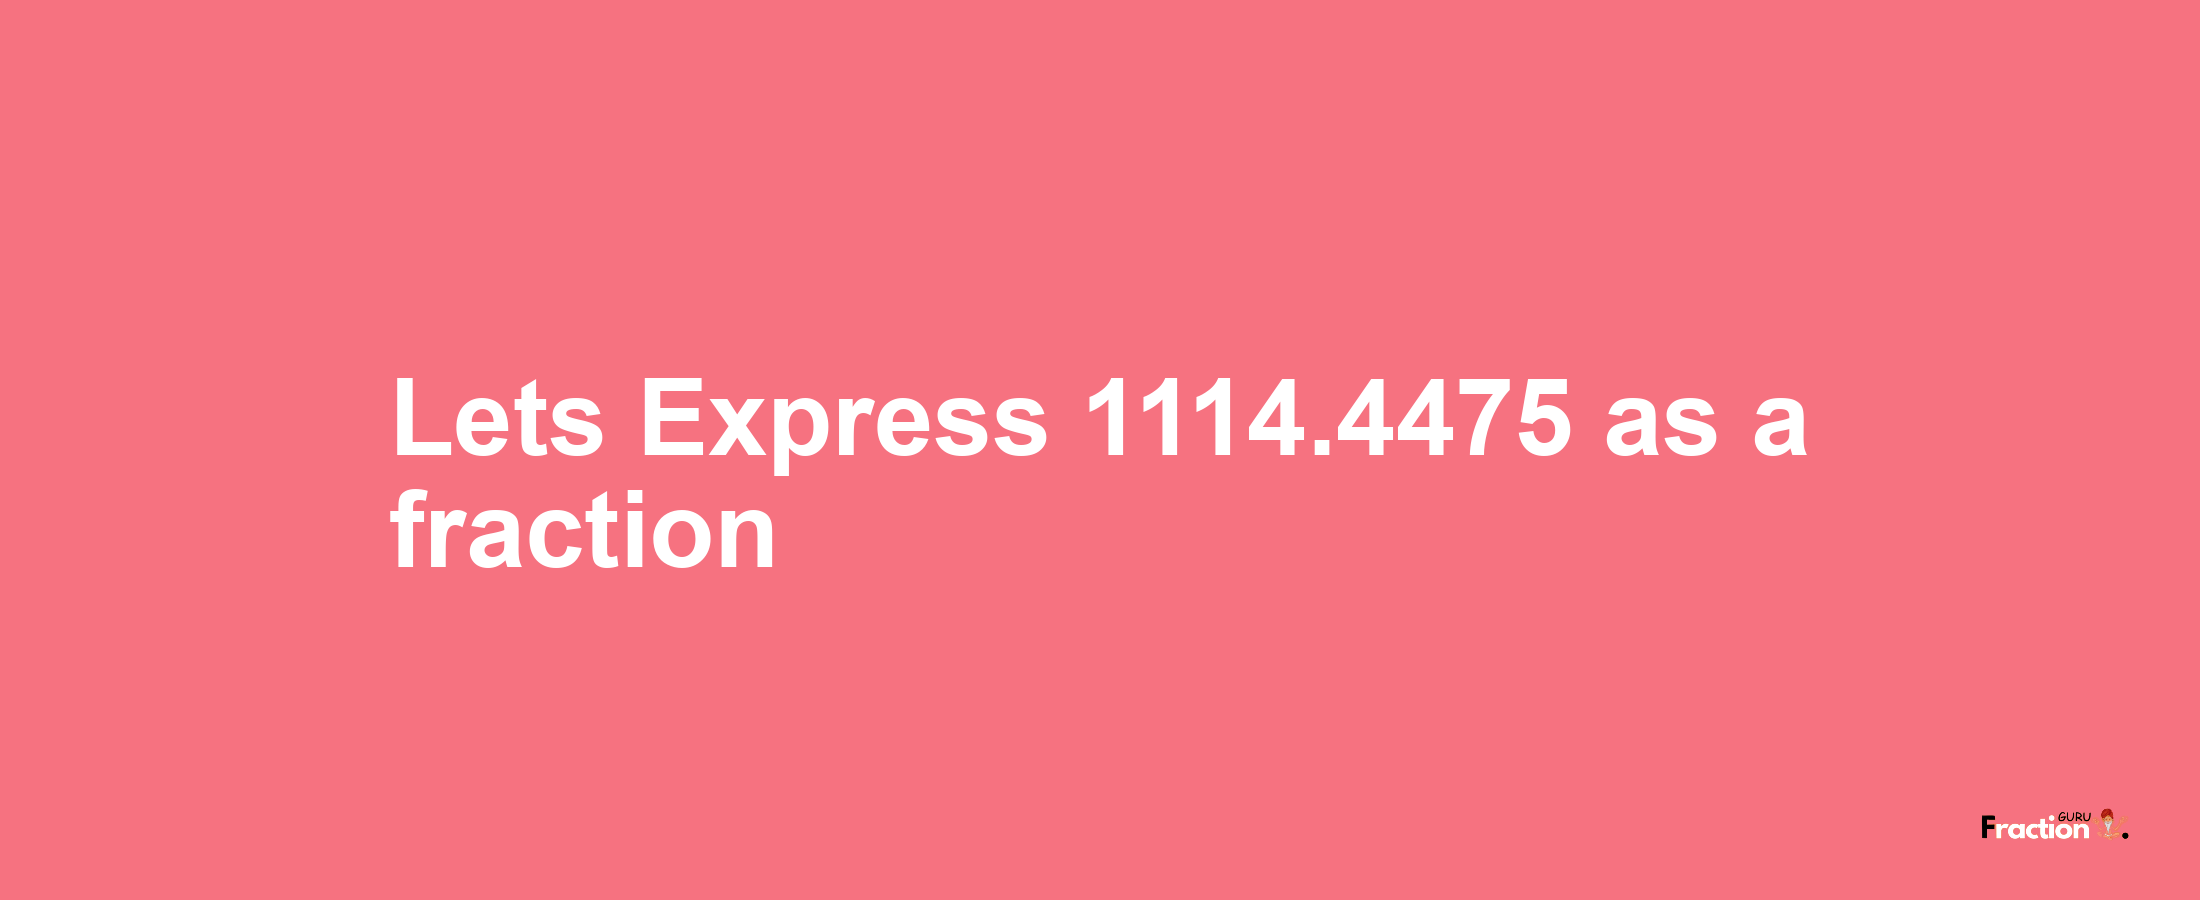 Lets Express 1114.4475 as afraction